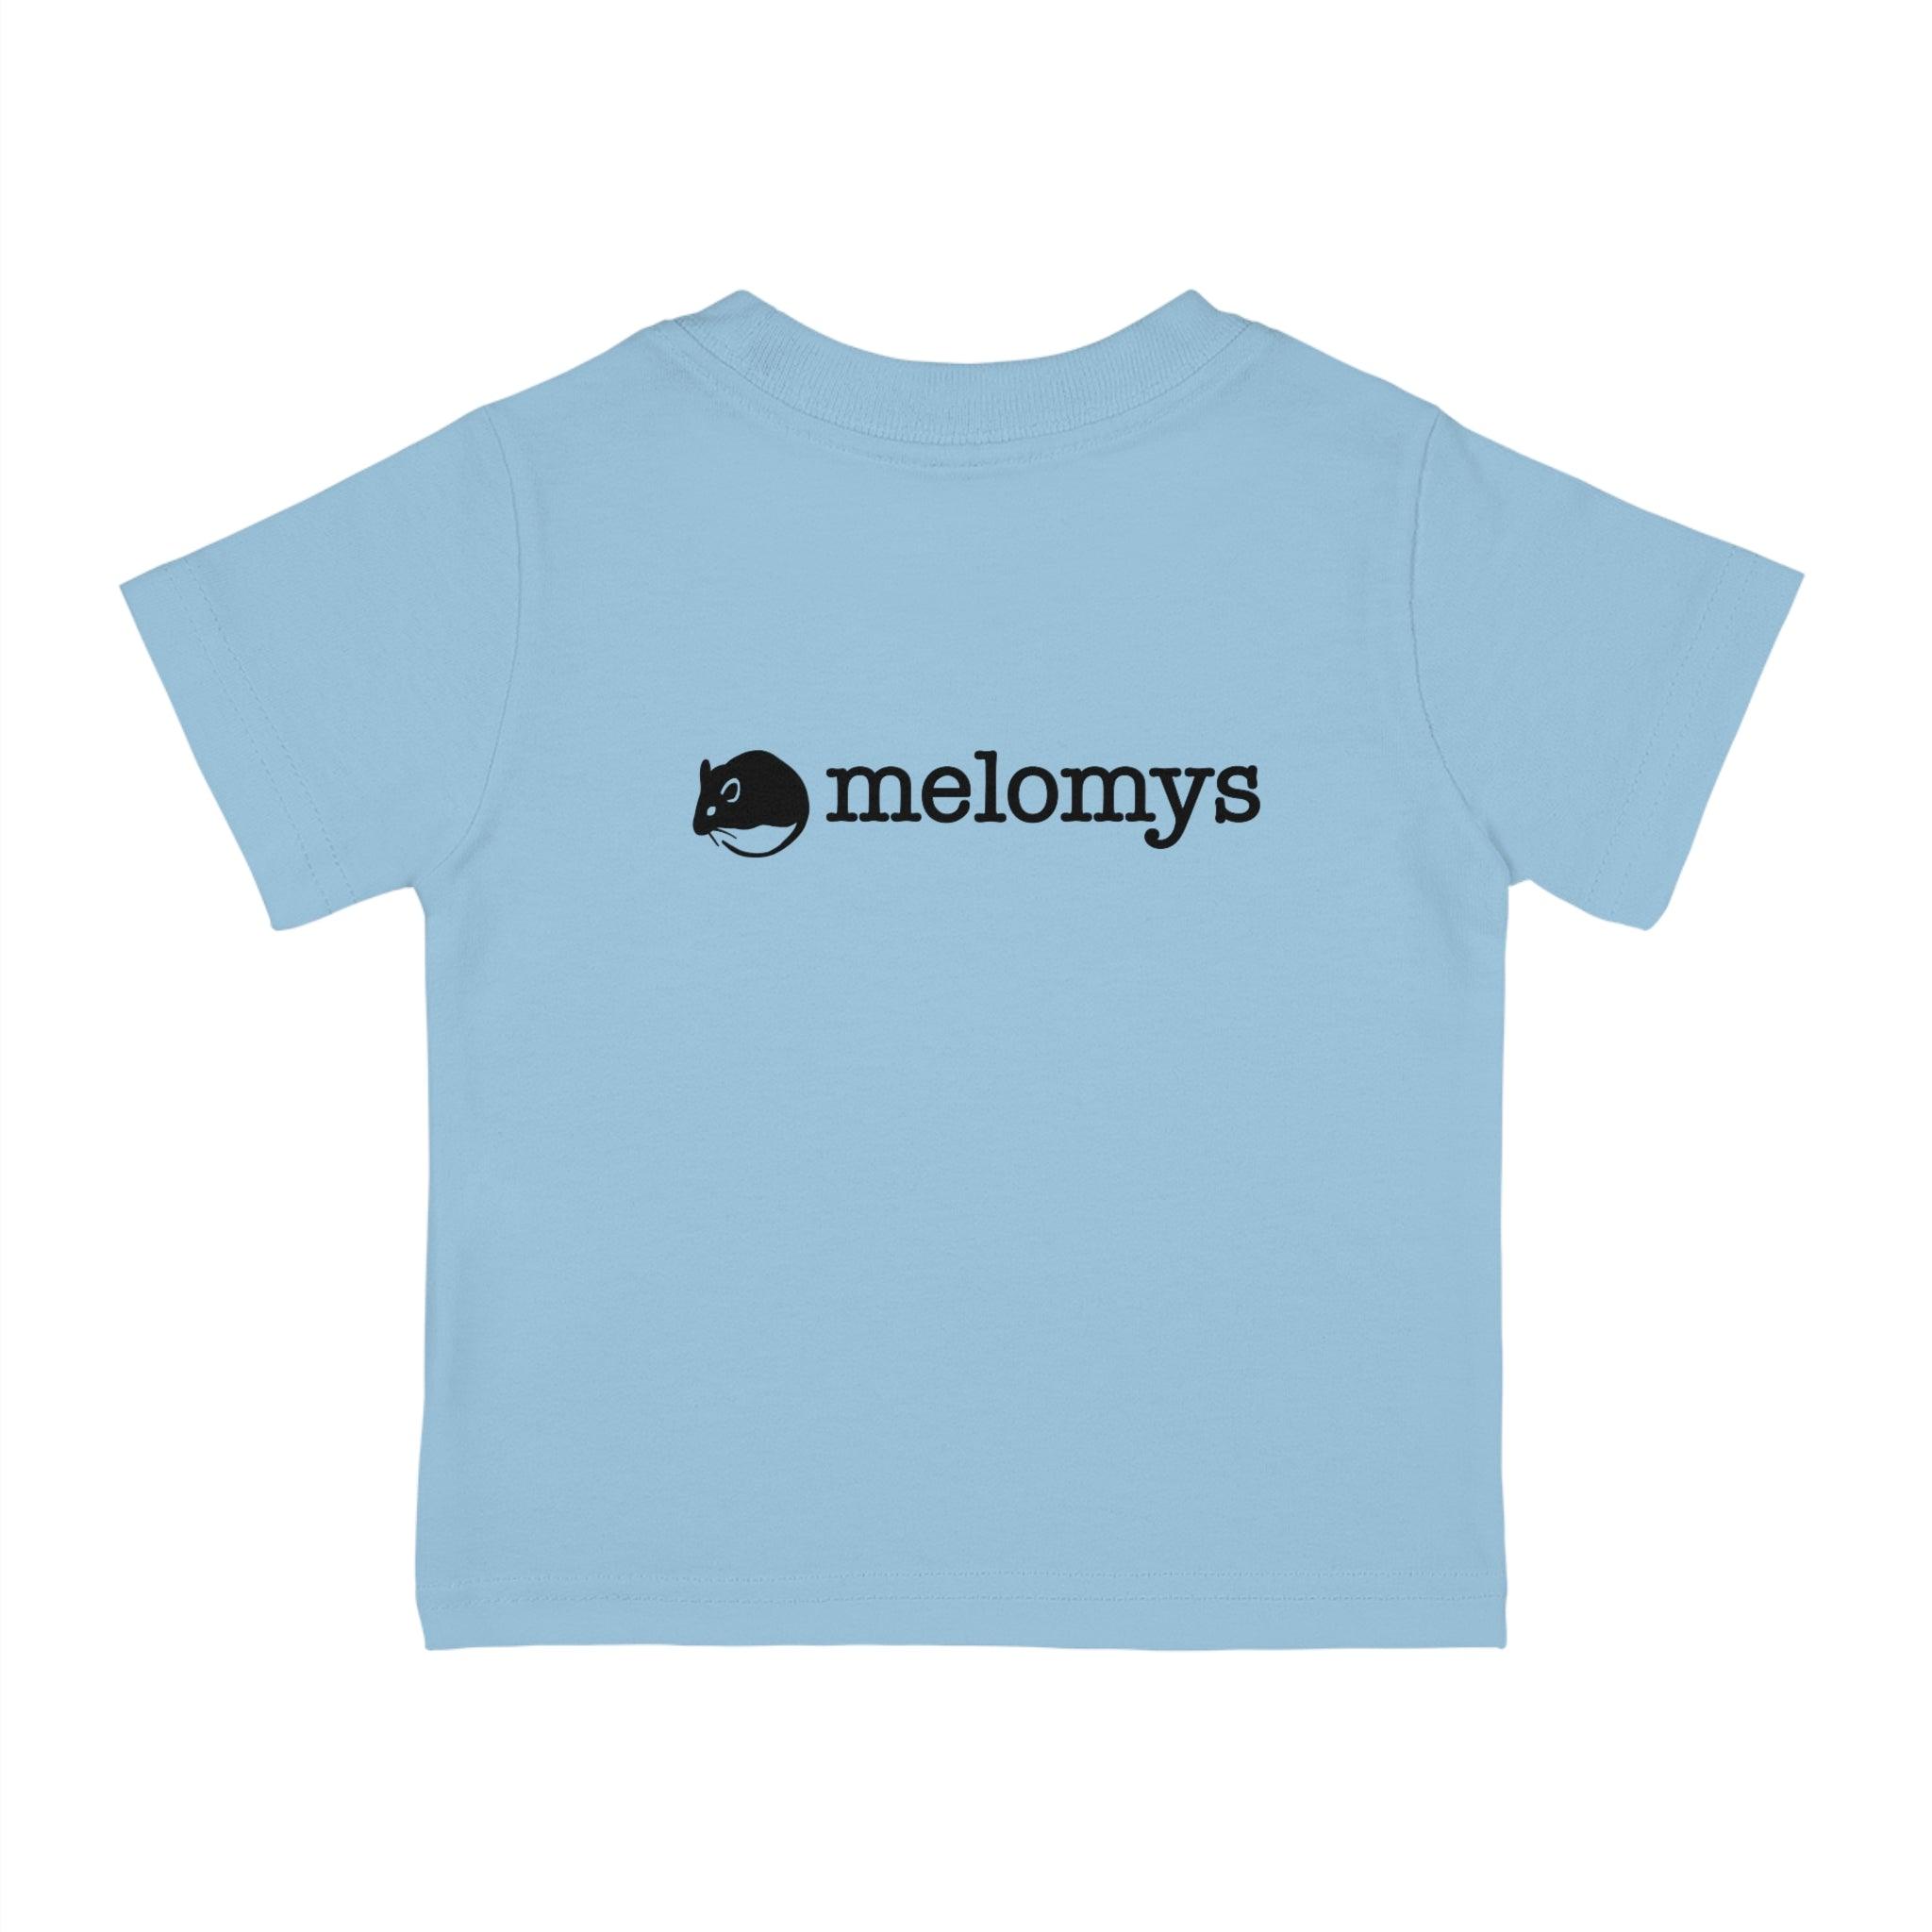 Melomys "Keep The Sea Plastic Free" Infant 100% Cotton Jersey T-Shirt - Melomys